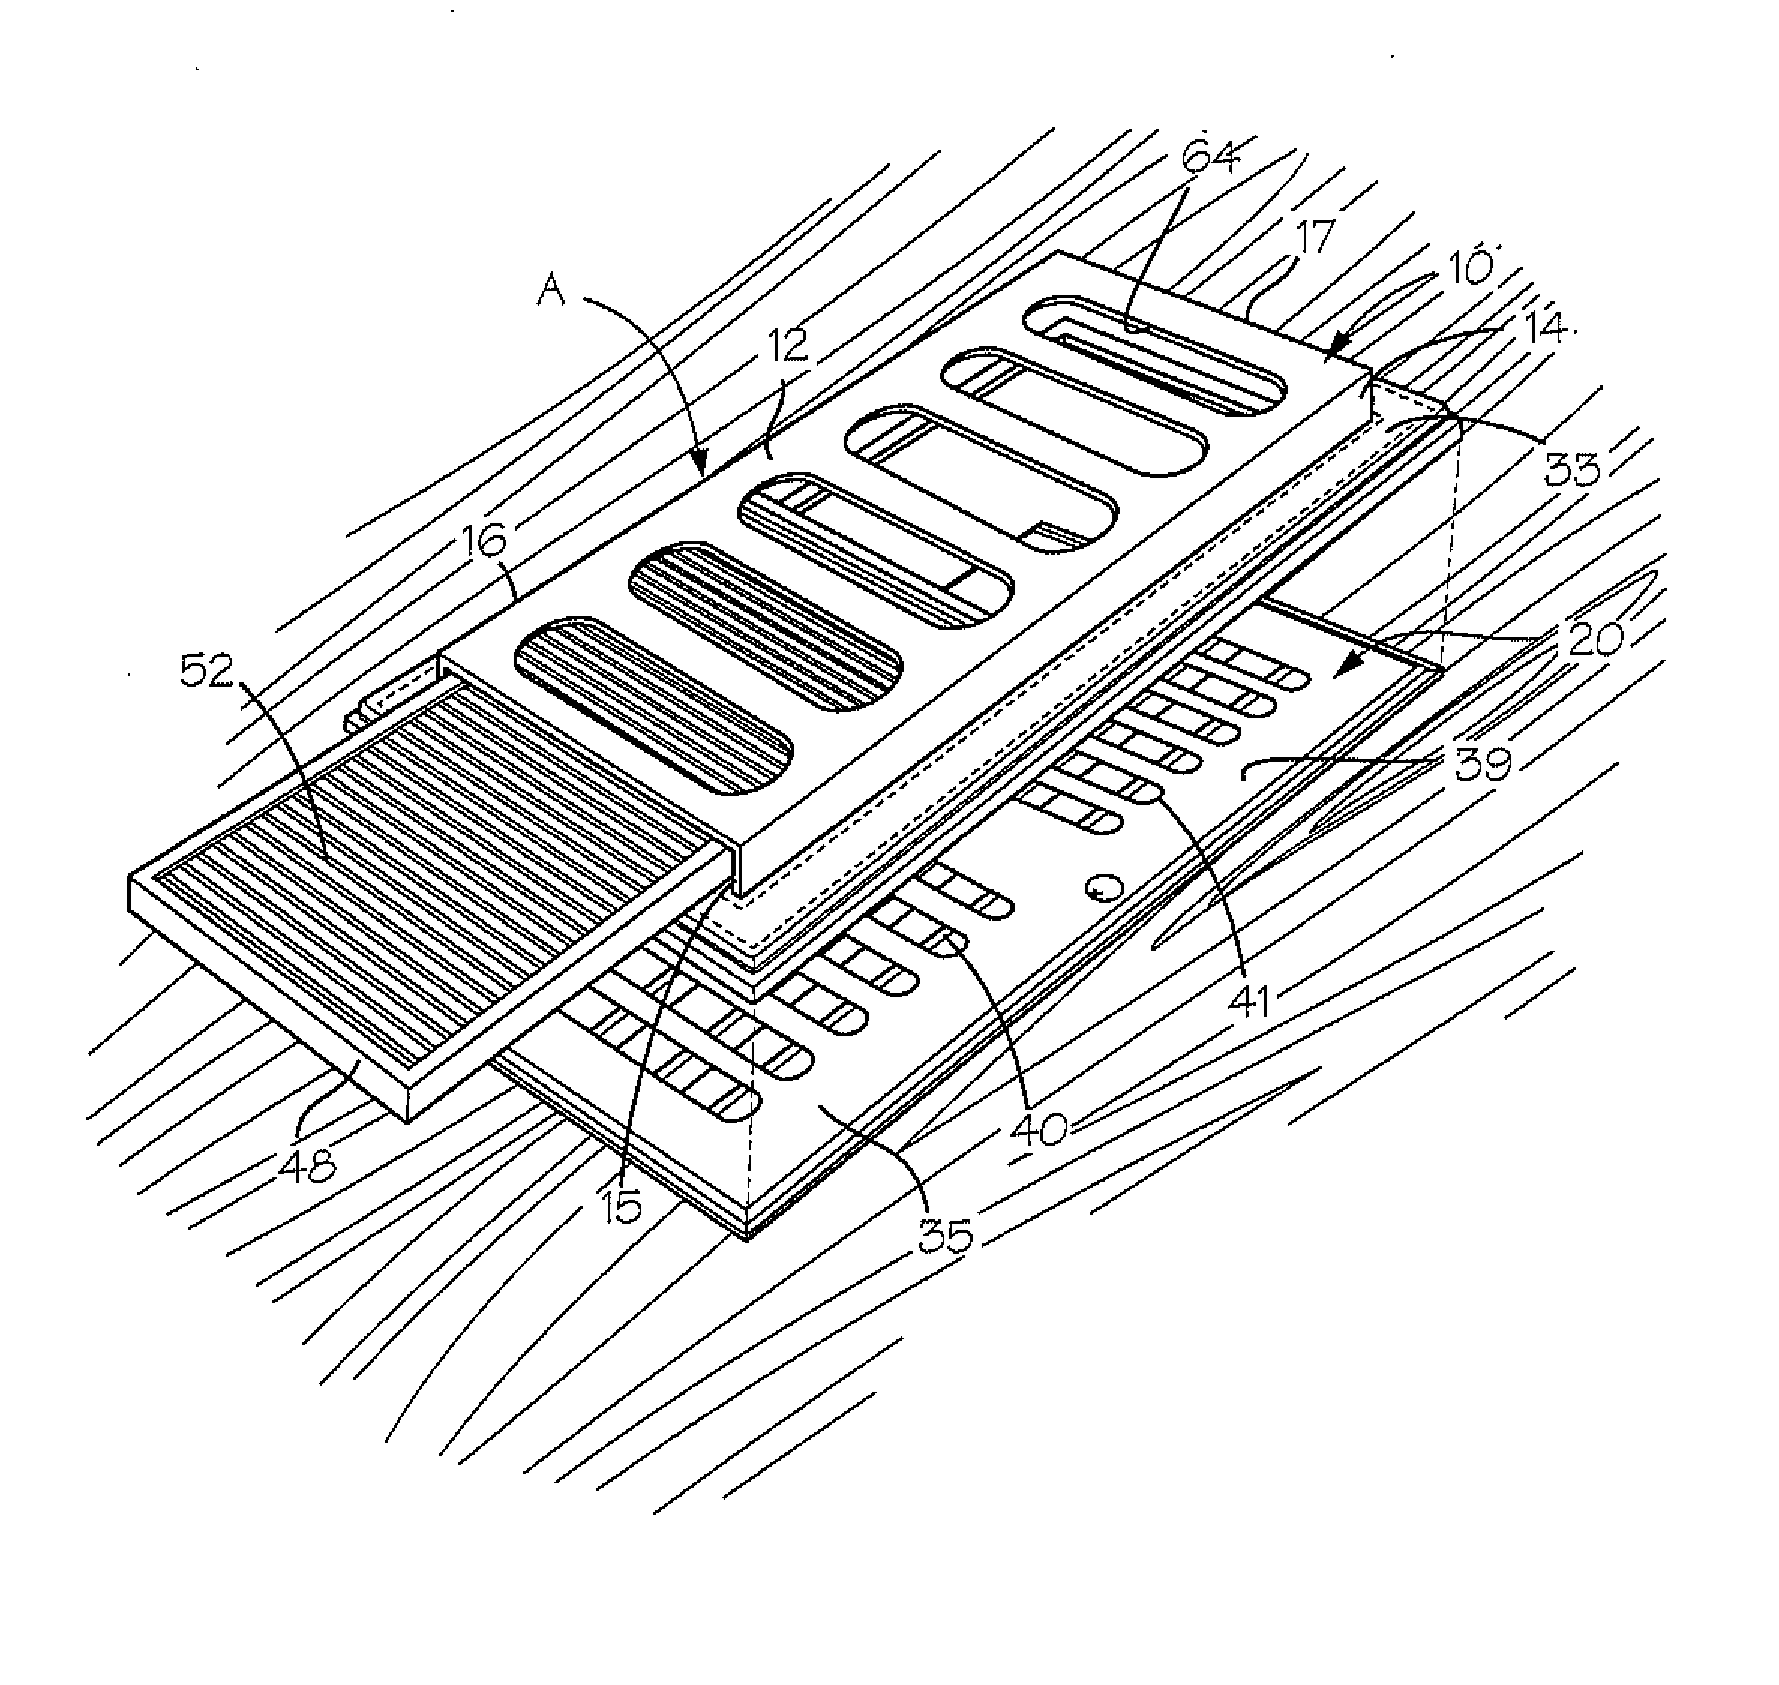 Attachable air filter for an air vent register